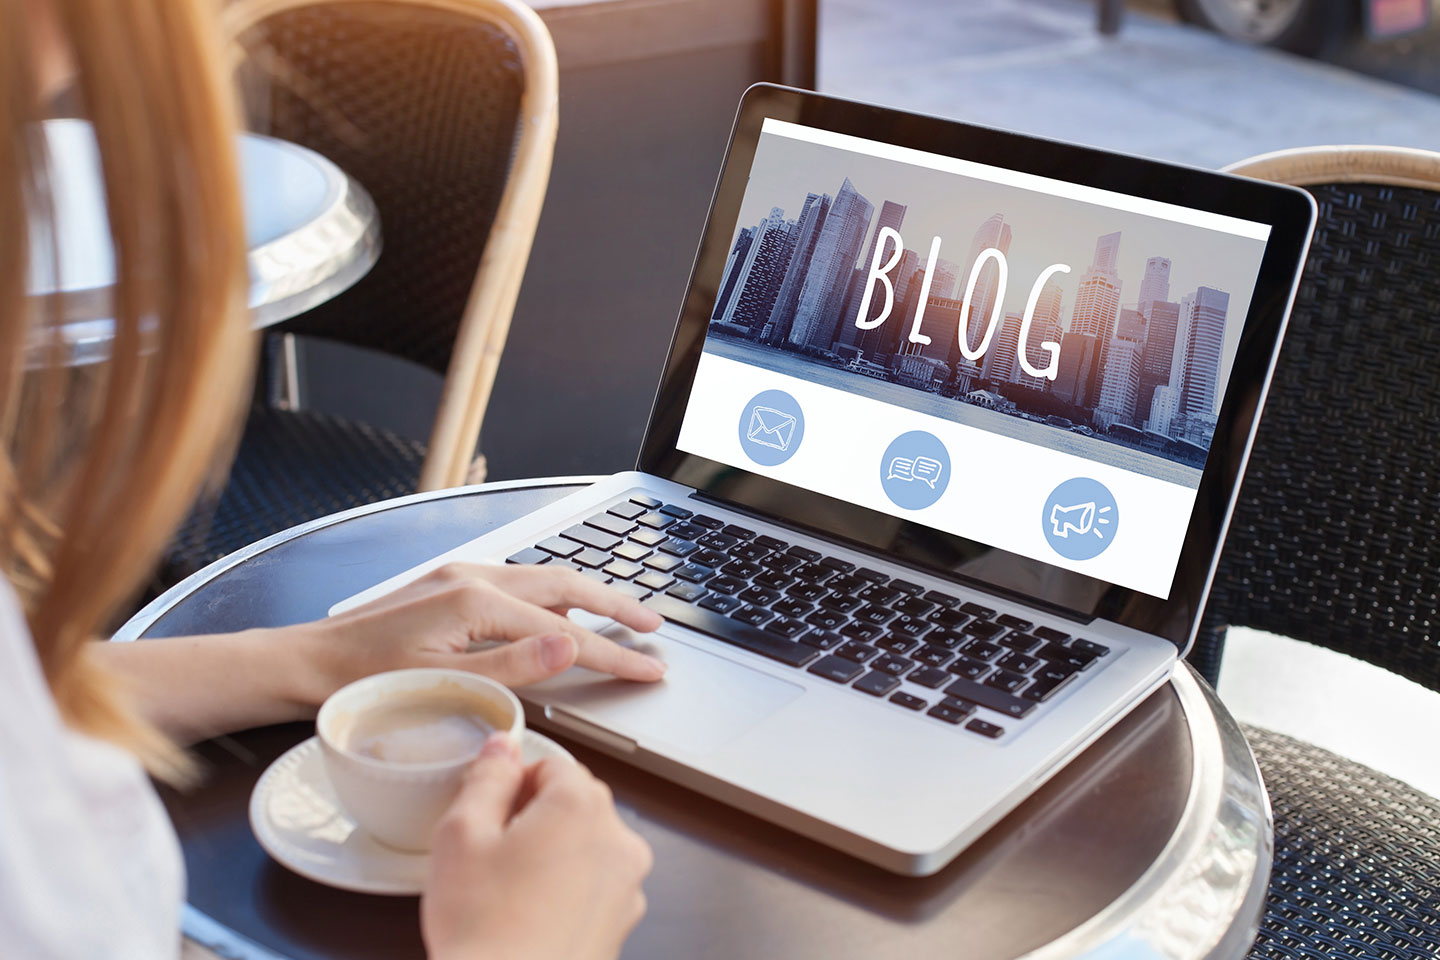 Which are the best hospitality blogs?